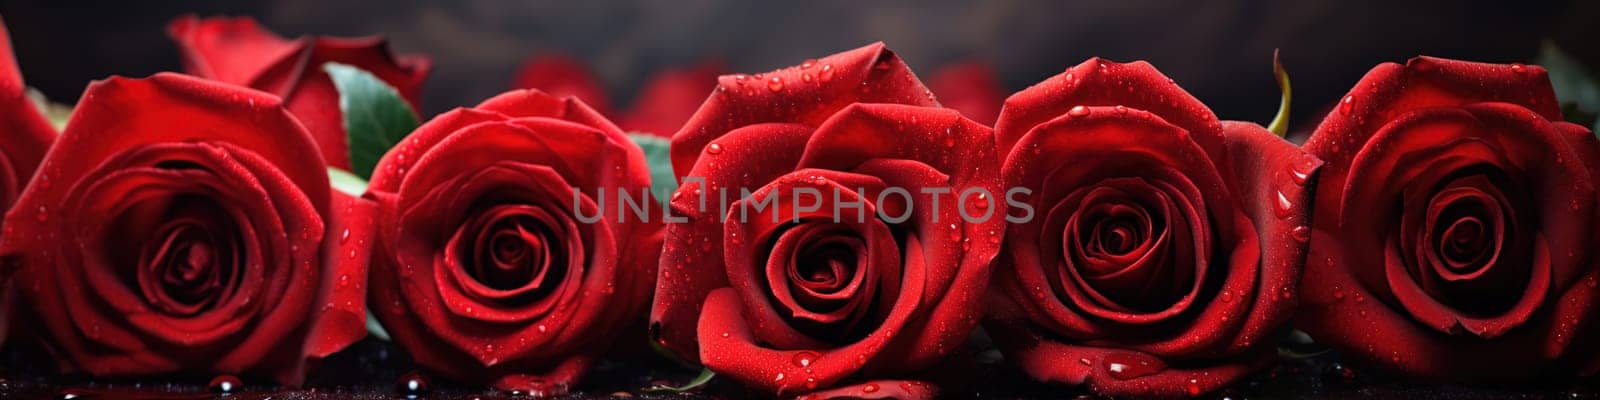 Red roses as a background or banner by Kadula